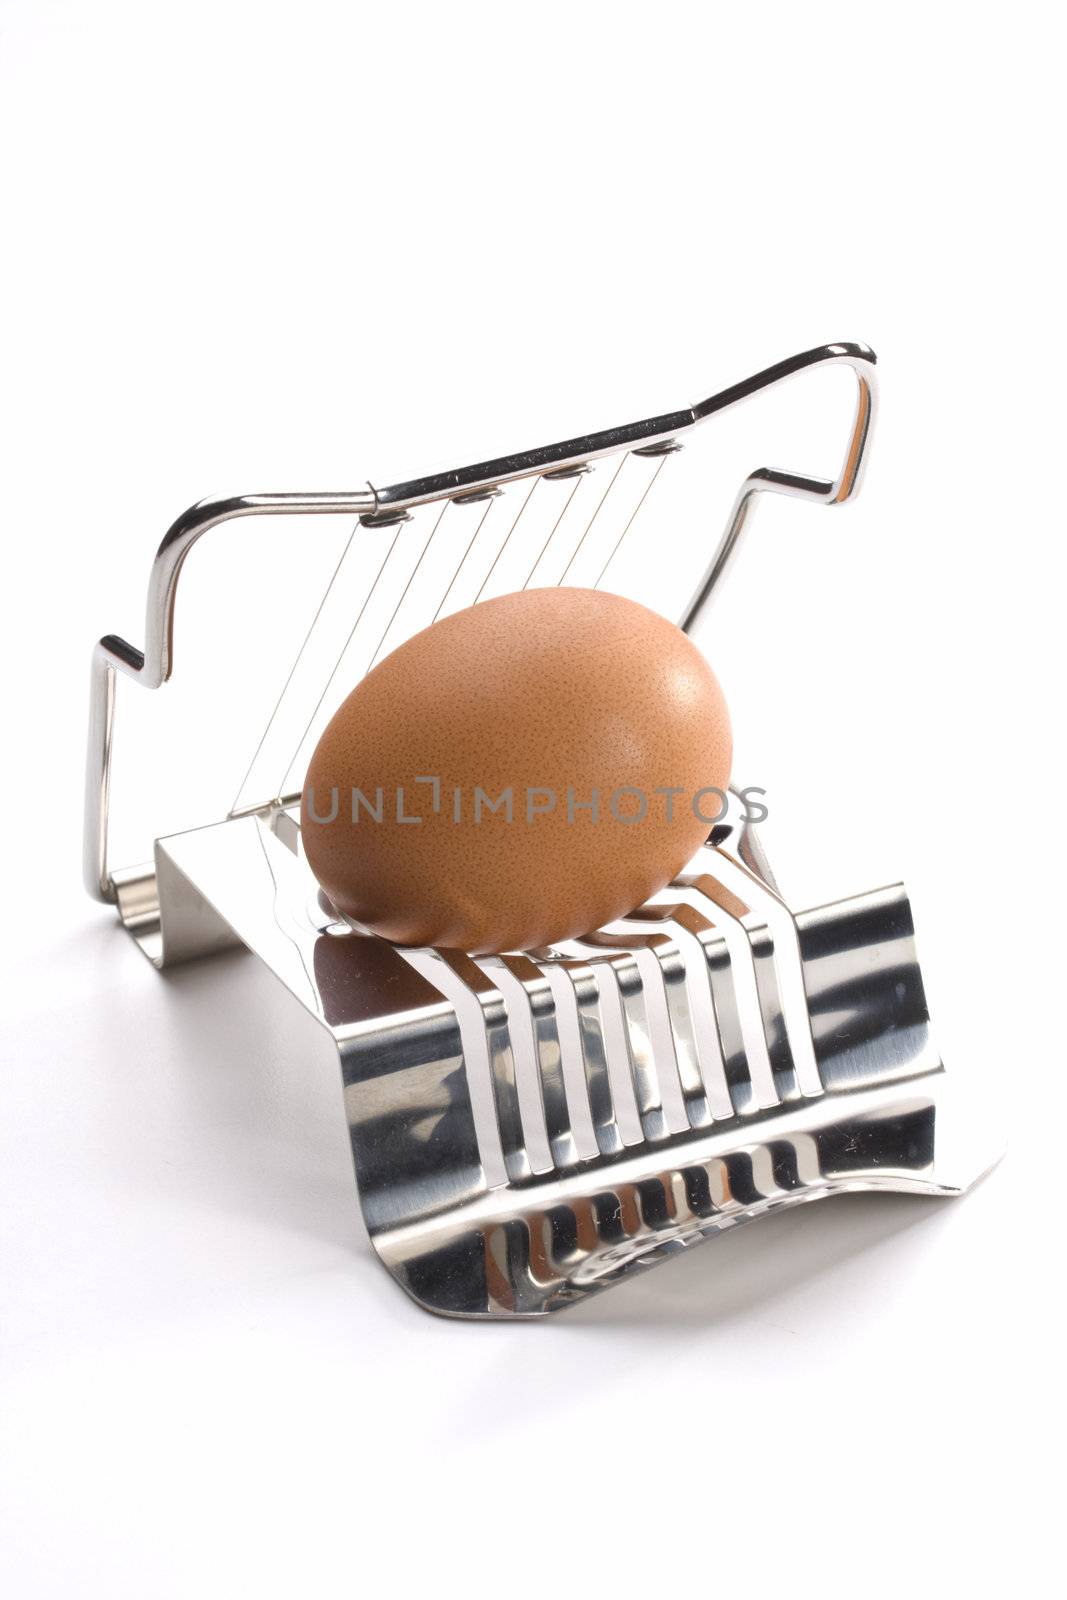 egg cutter with an egg on white background